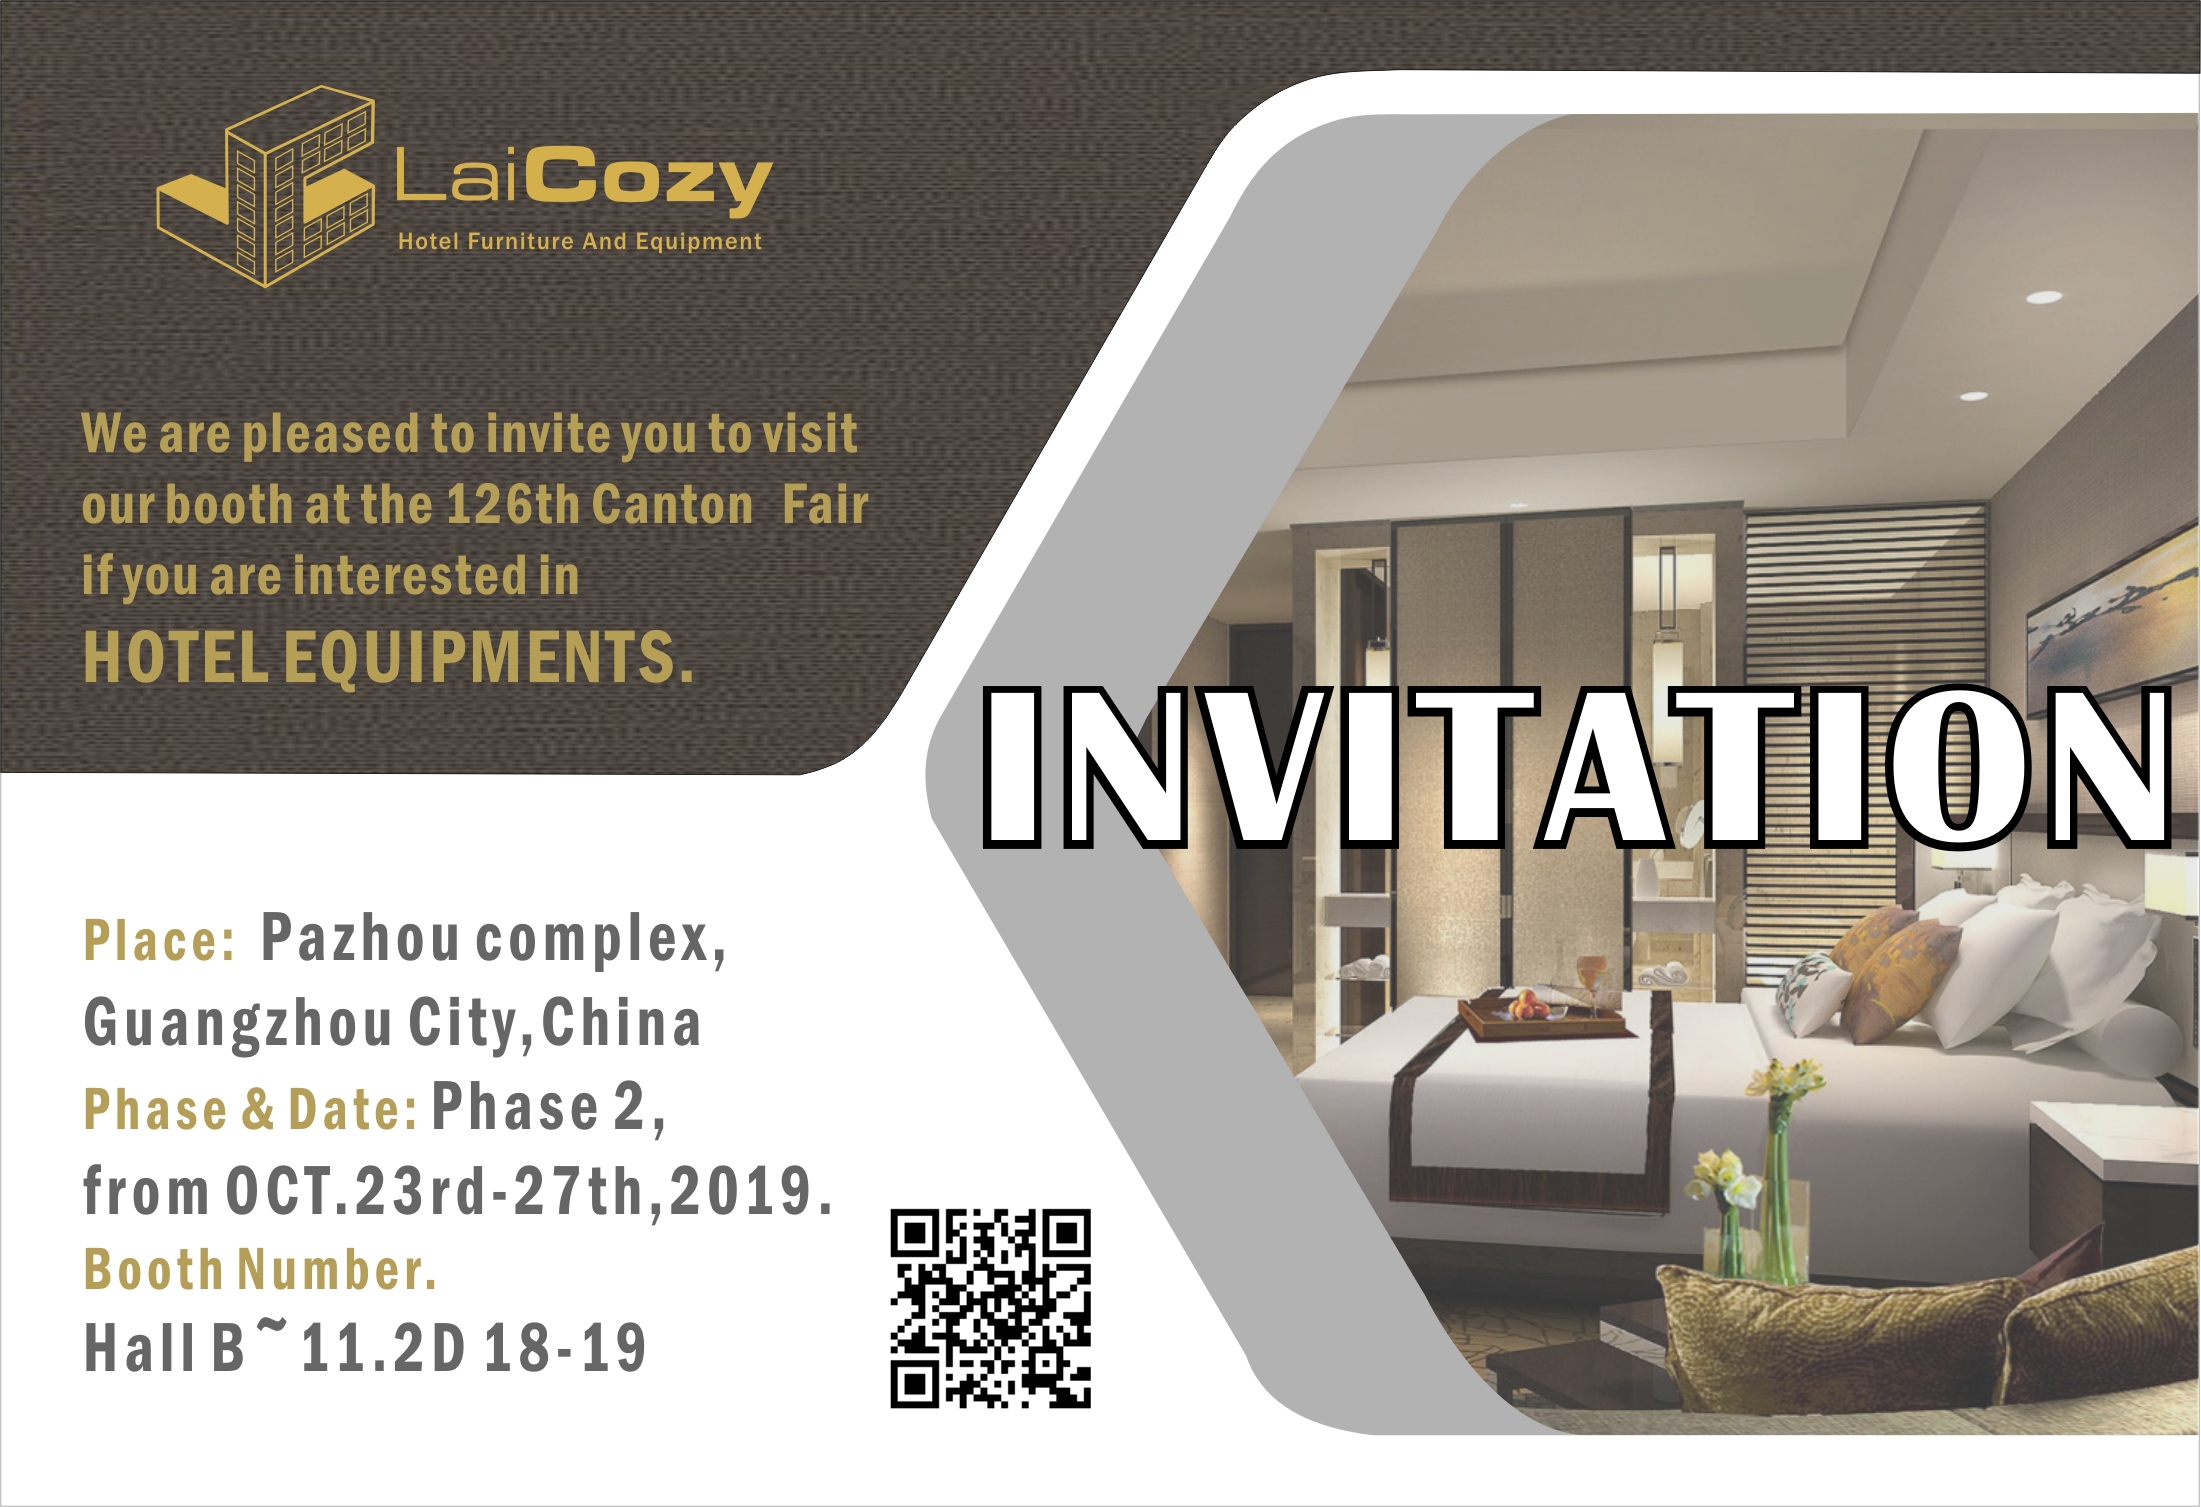 The 126th Canton fair from Oct 23-27 (Laicozy hotel items booth NO: 11.2D18-19)